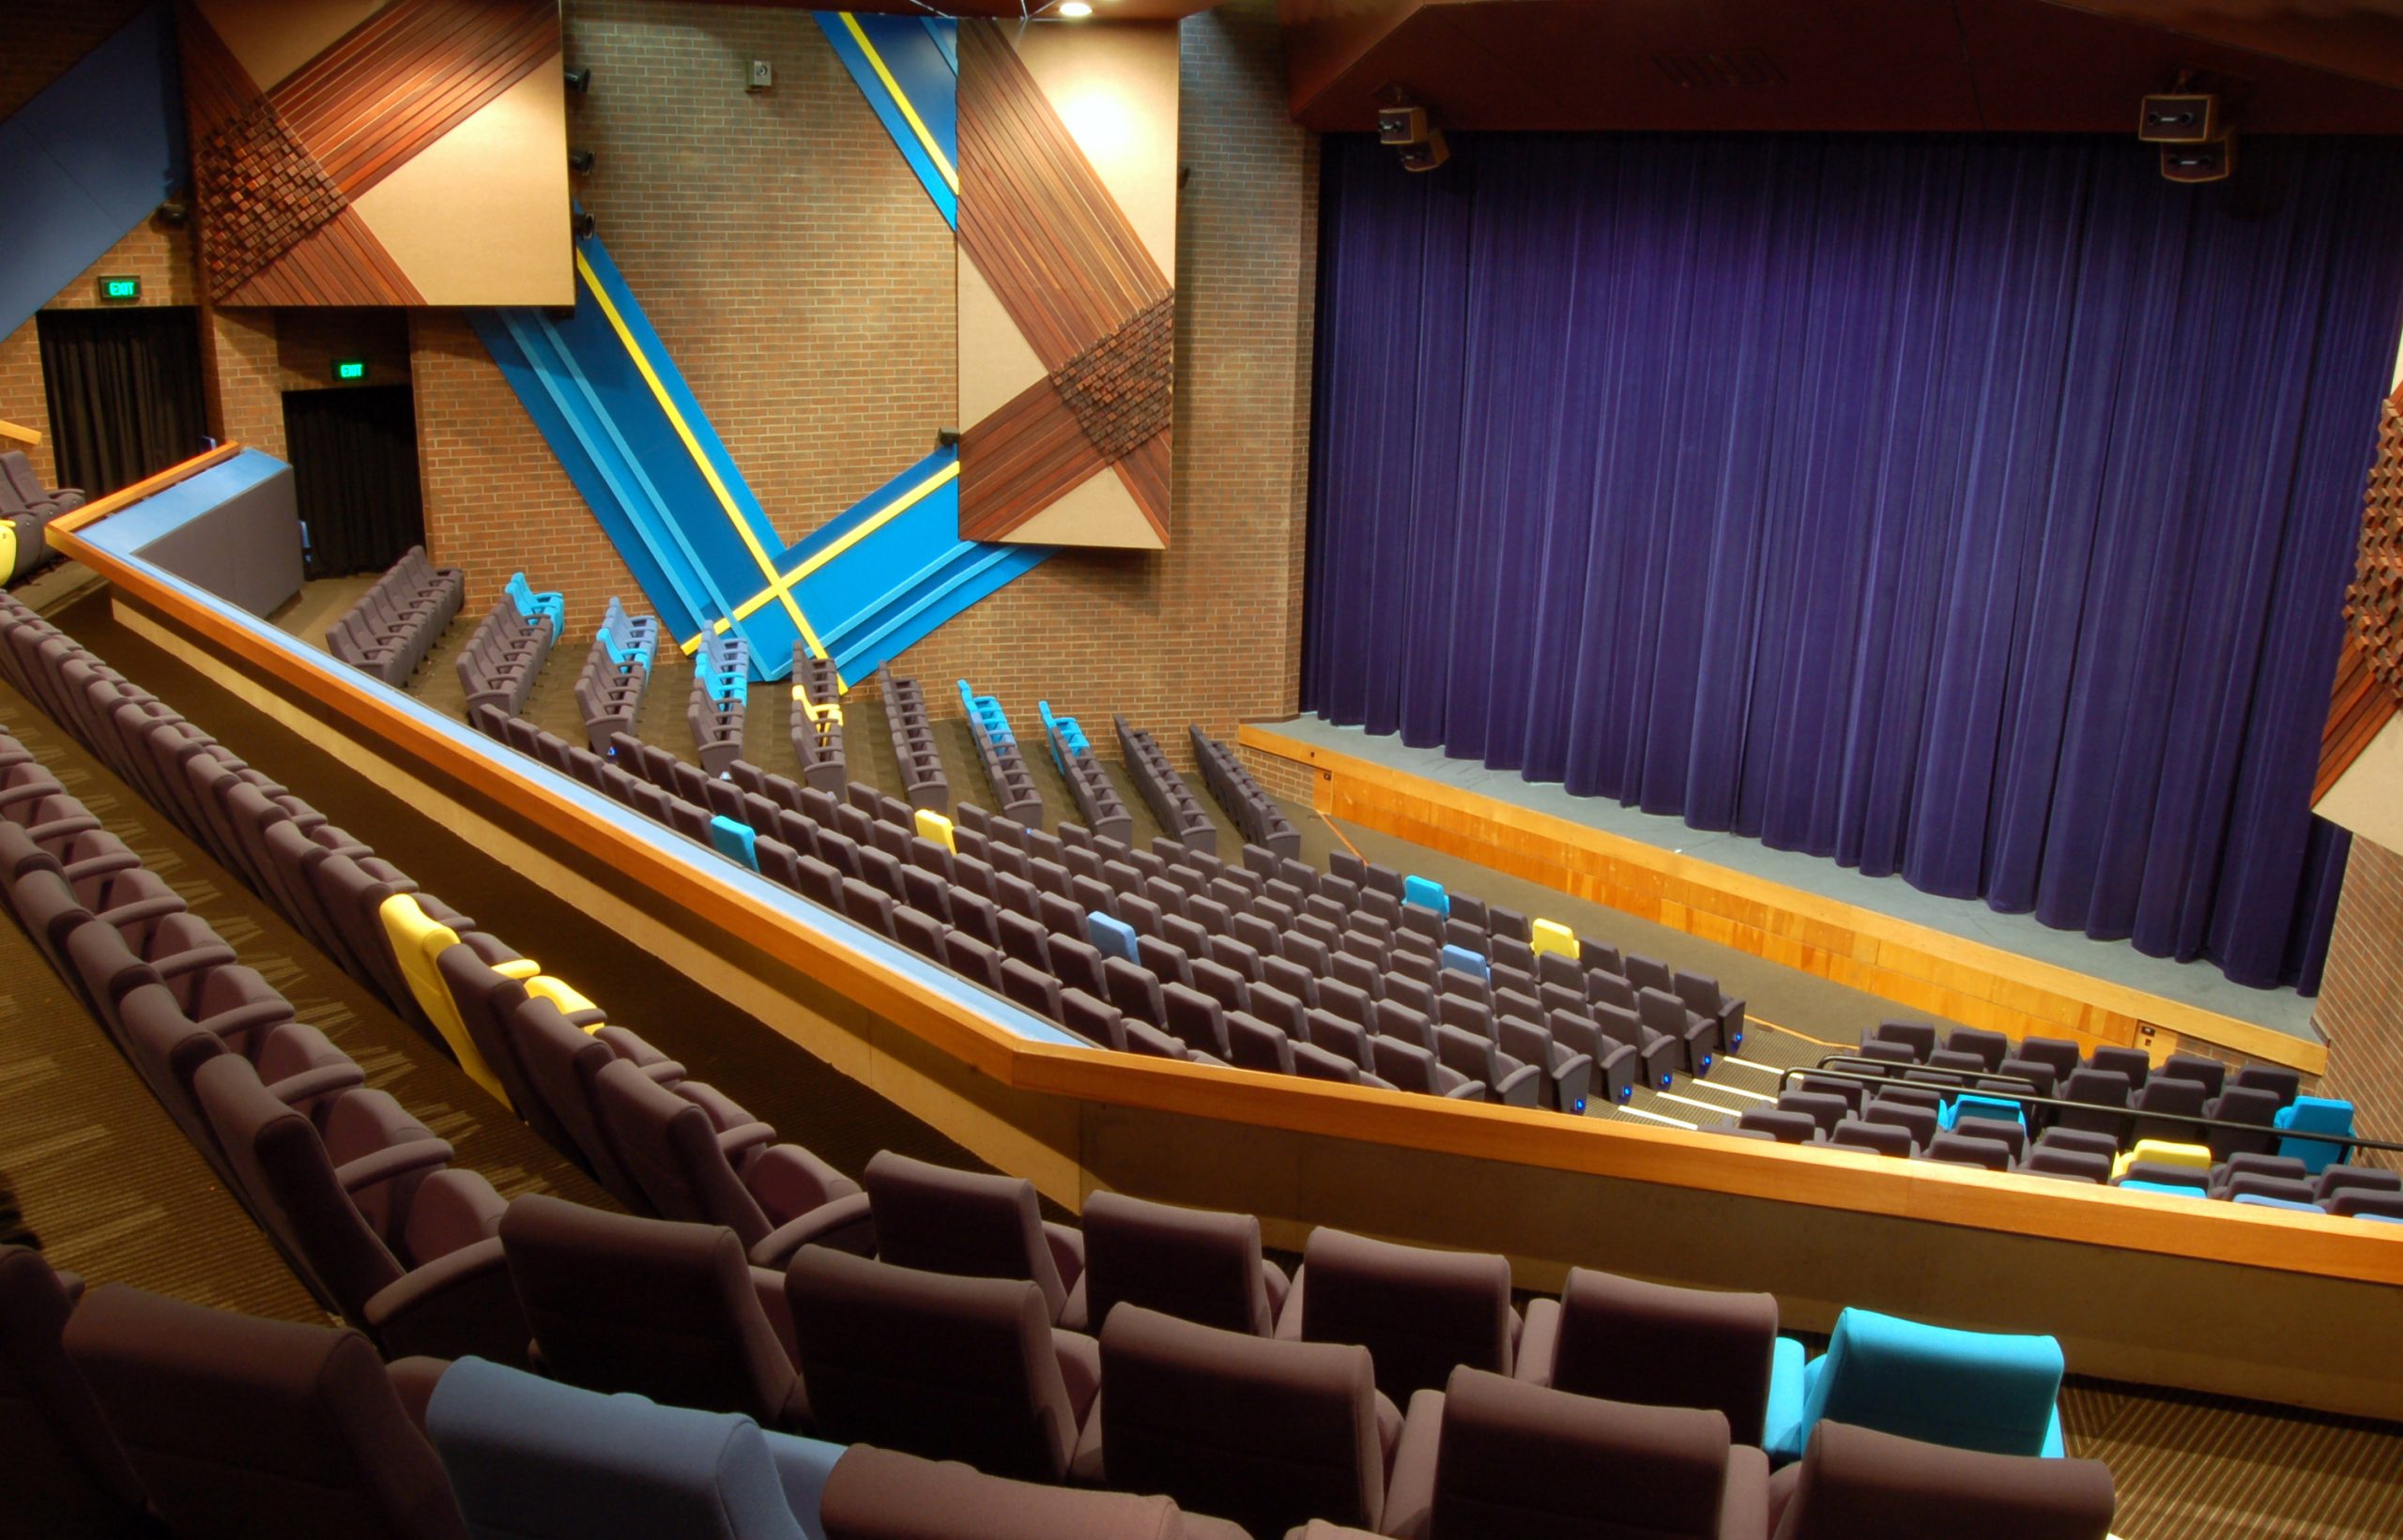 The interior of the Chaffey Theatre, shot from the audience's perspective. The theatre is empty and dark, with brown seats and a deep blue curtain closed across the stage area.